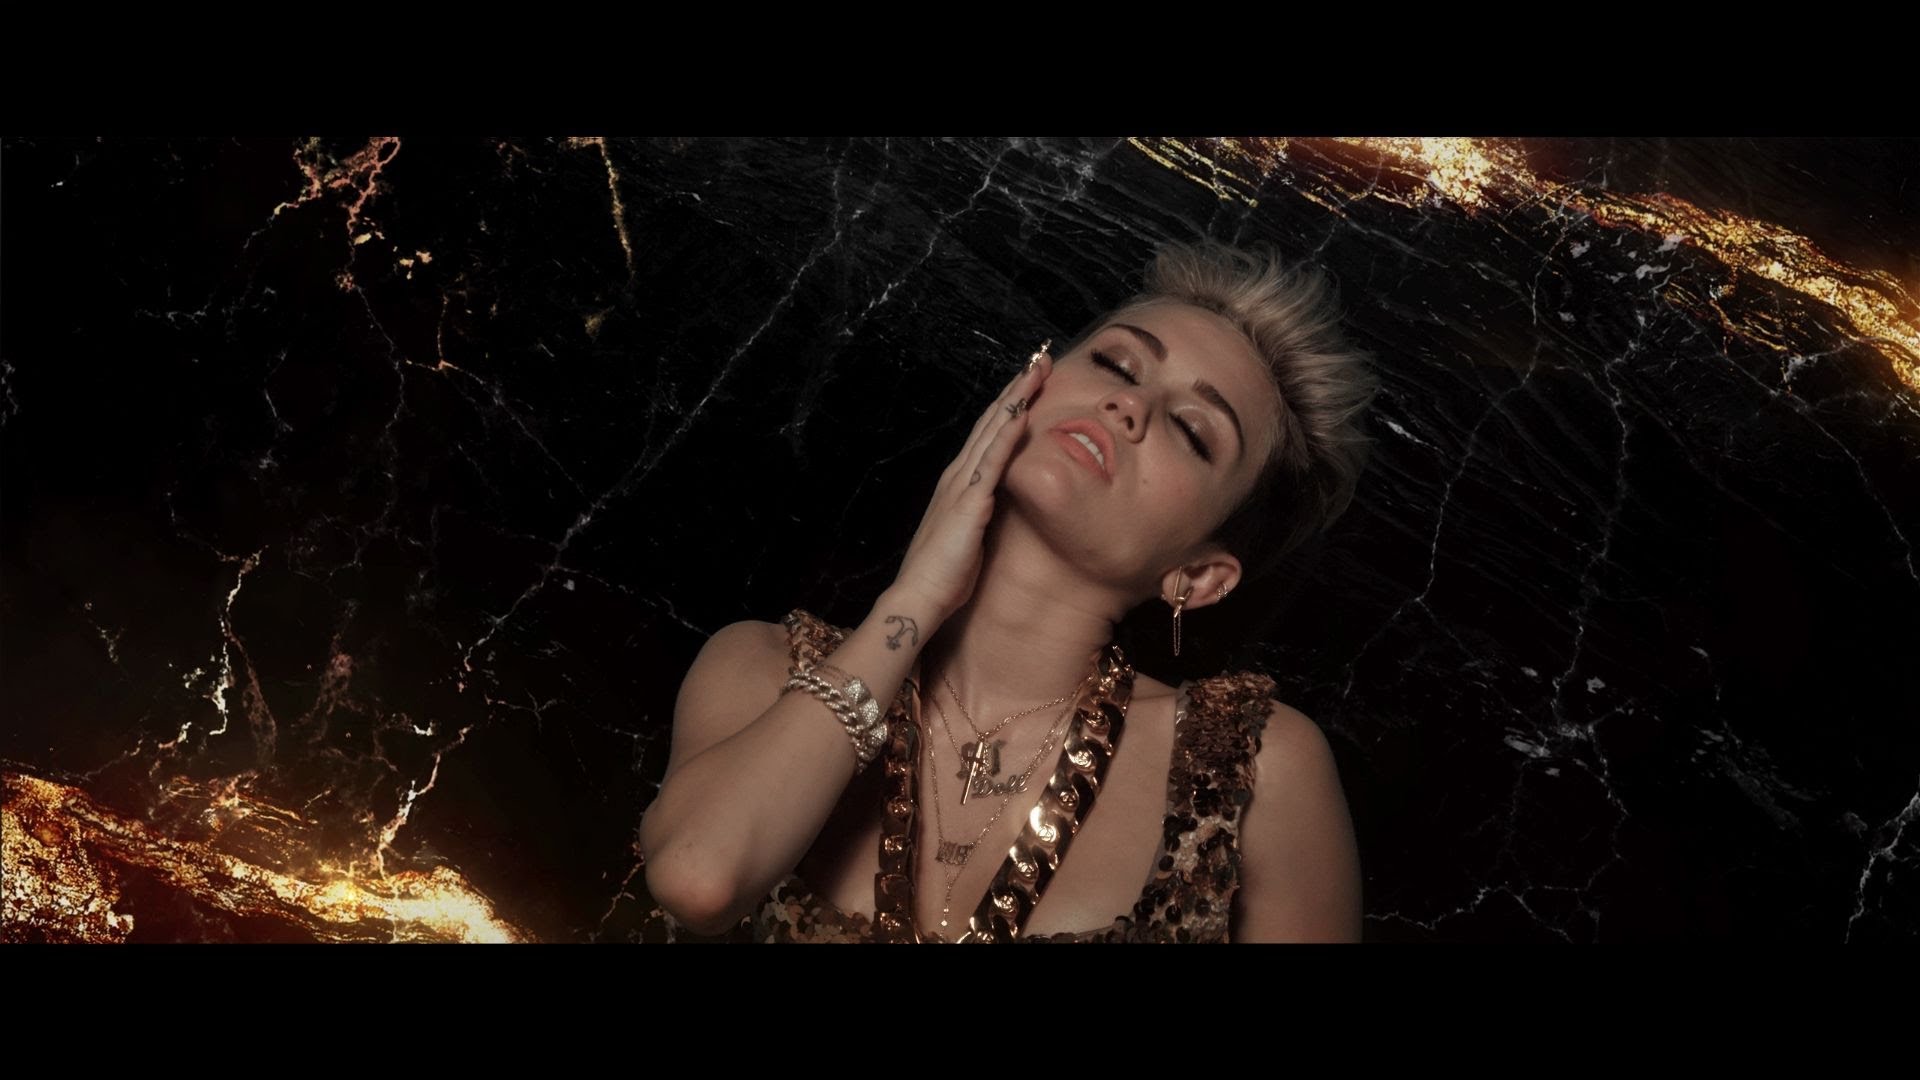 Miley Cyrus: Strong Woman Or Hot Revenue For Big Sean?